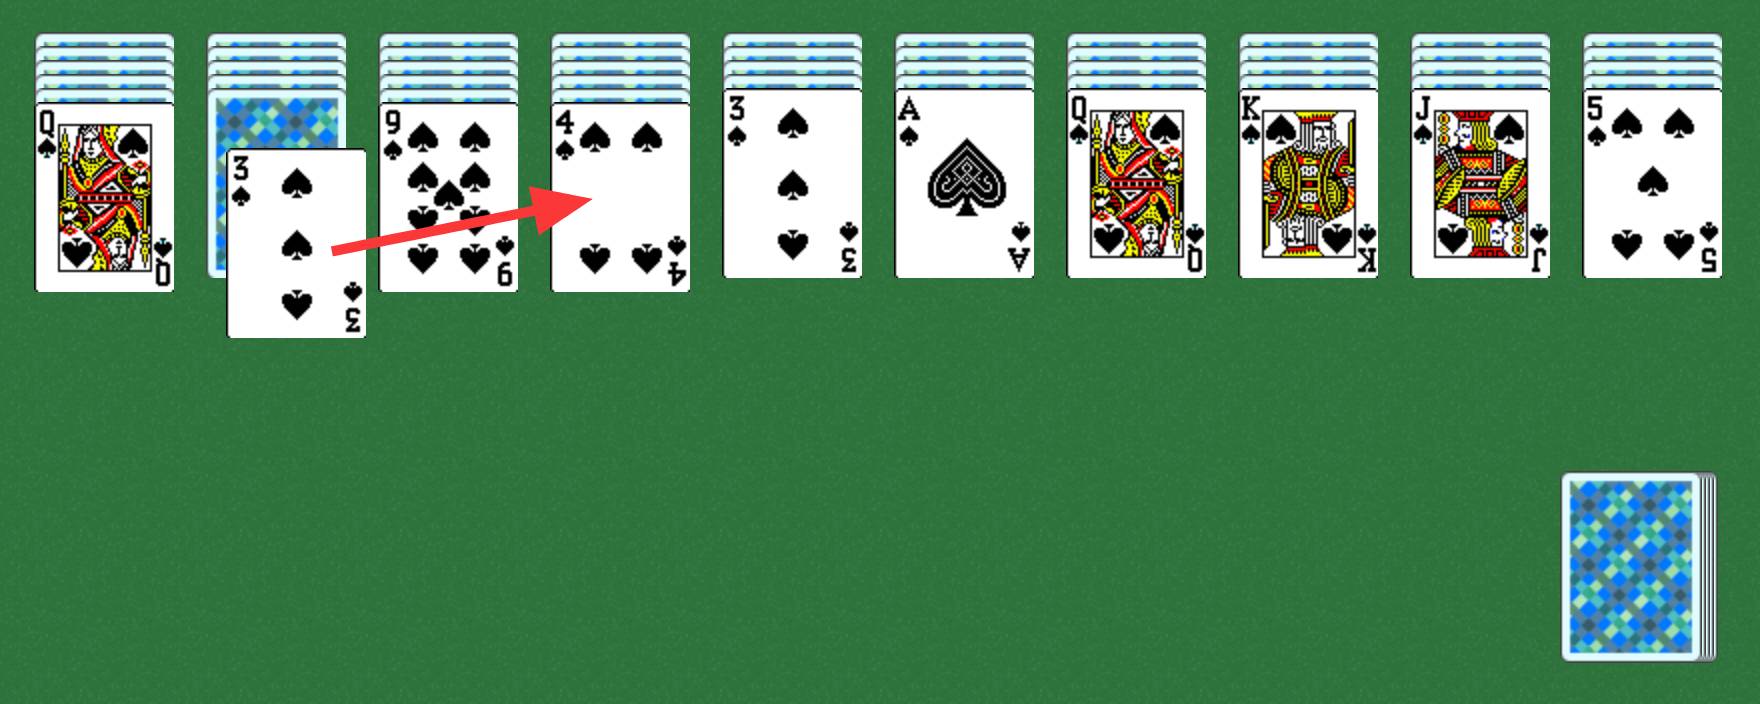 Quy tắc của Spider Solitaire